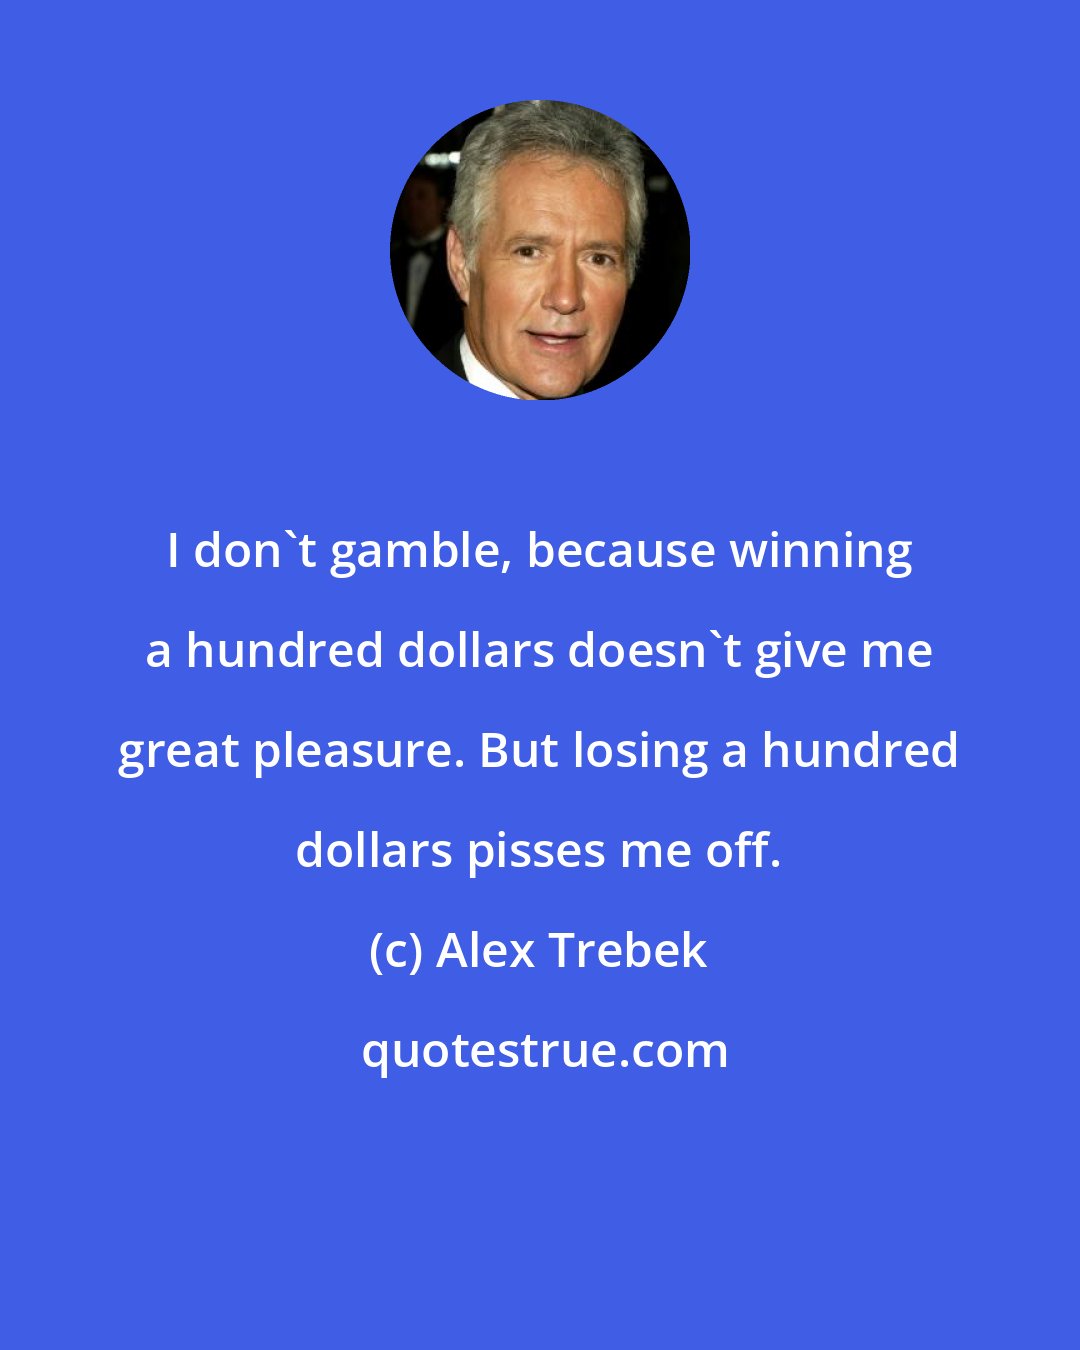 Alex Trebek: I don't gamble, because winning a hundred dollars doesn't give me great pleasure. But losing a hundred dollars pisses me off.